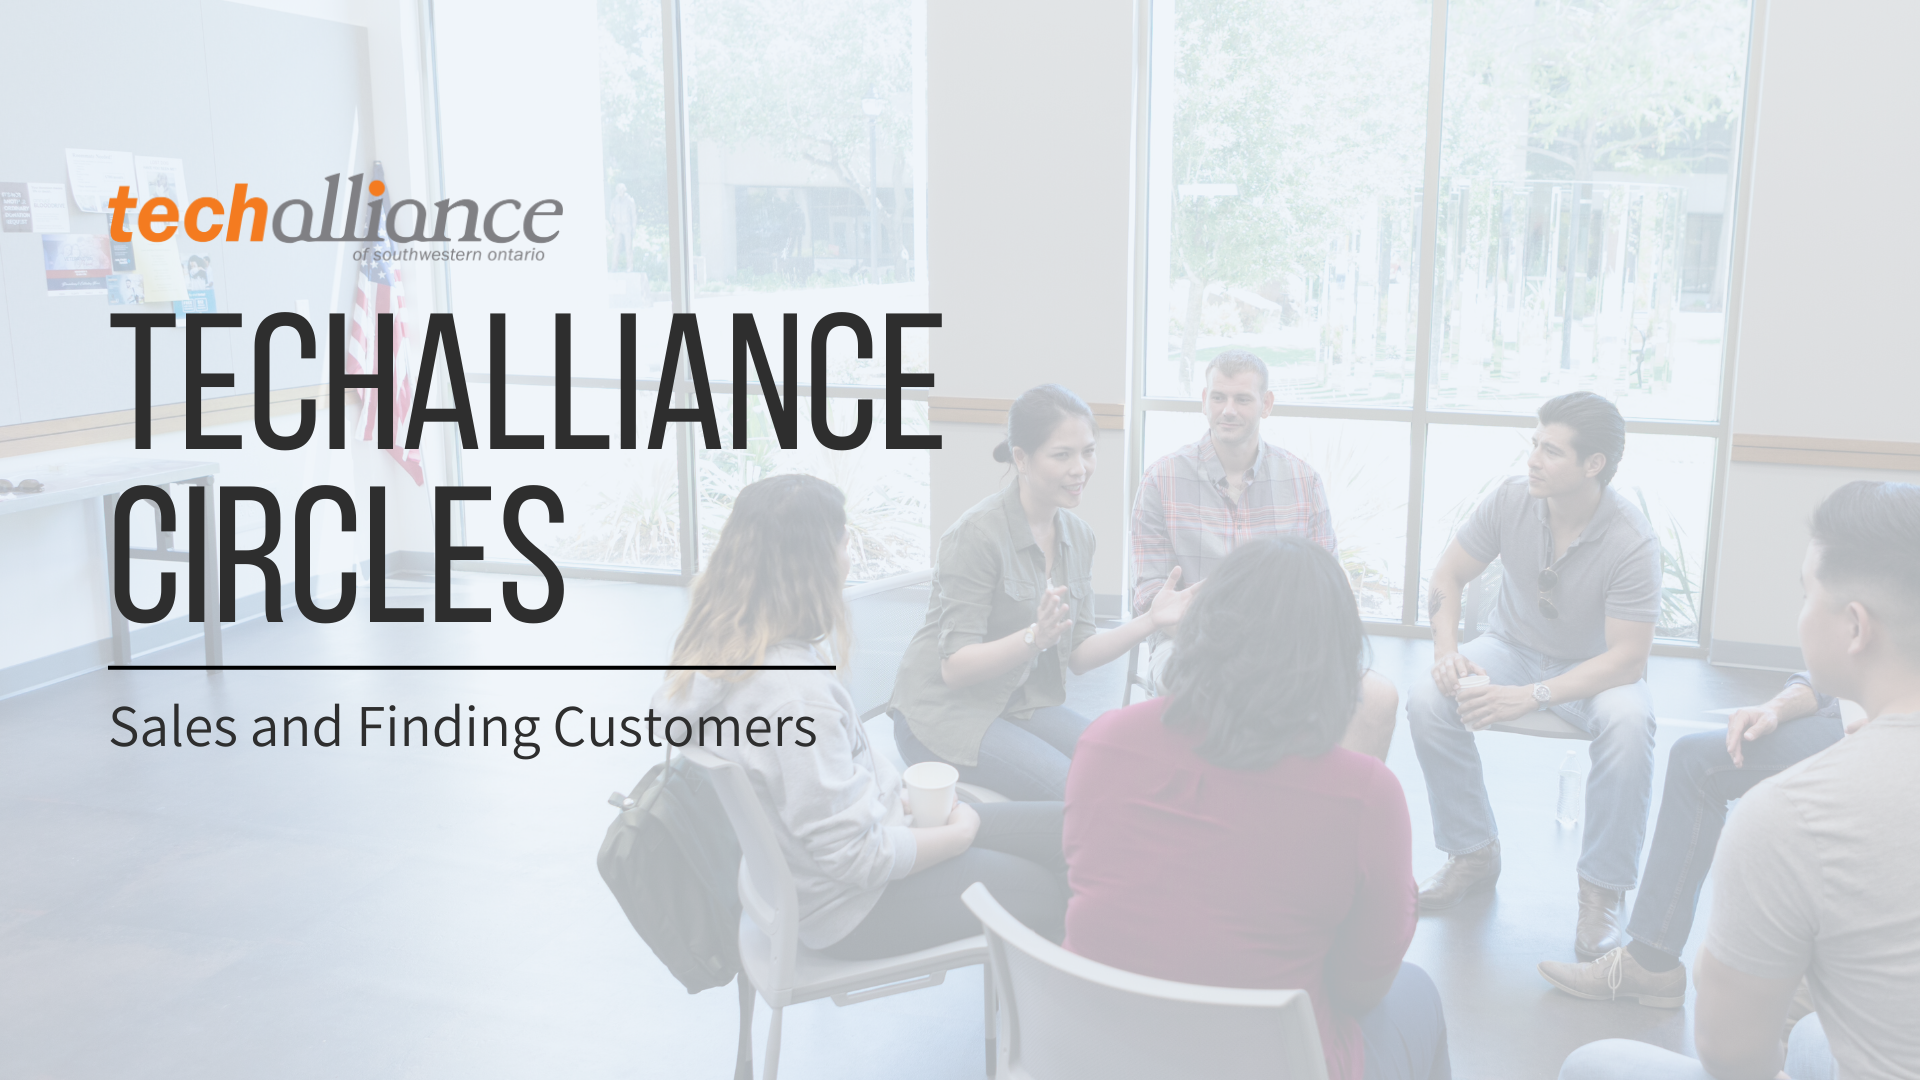 TechAlliance Circles - Sales and Finding Customers